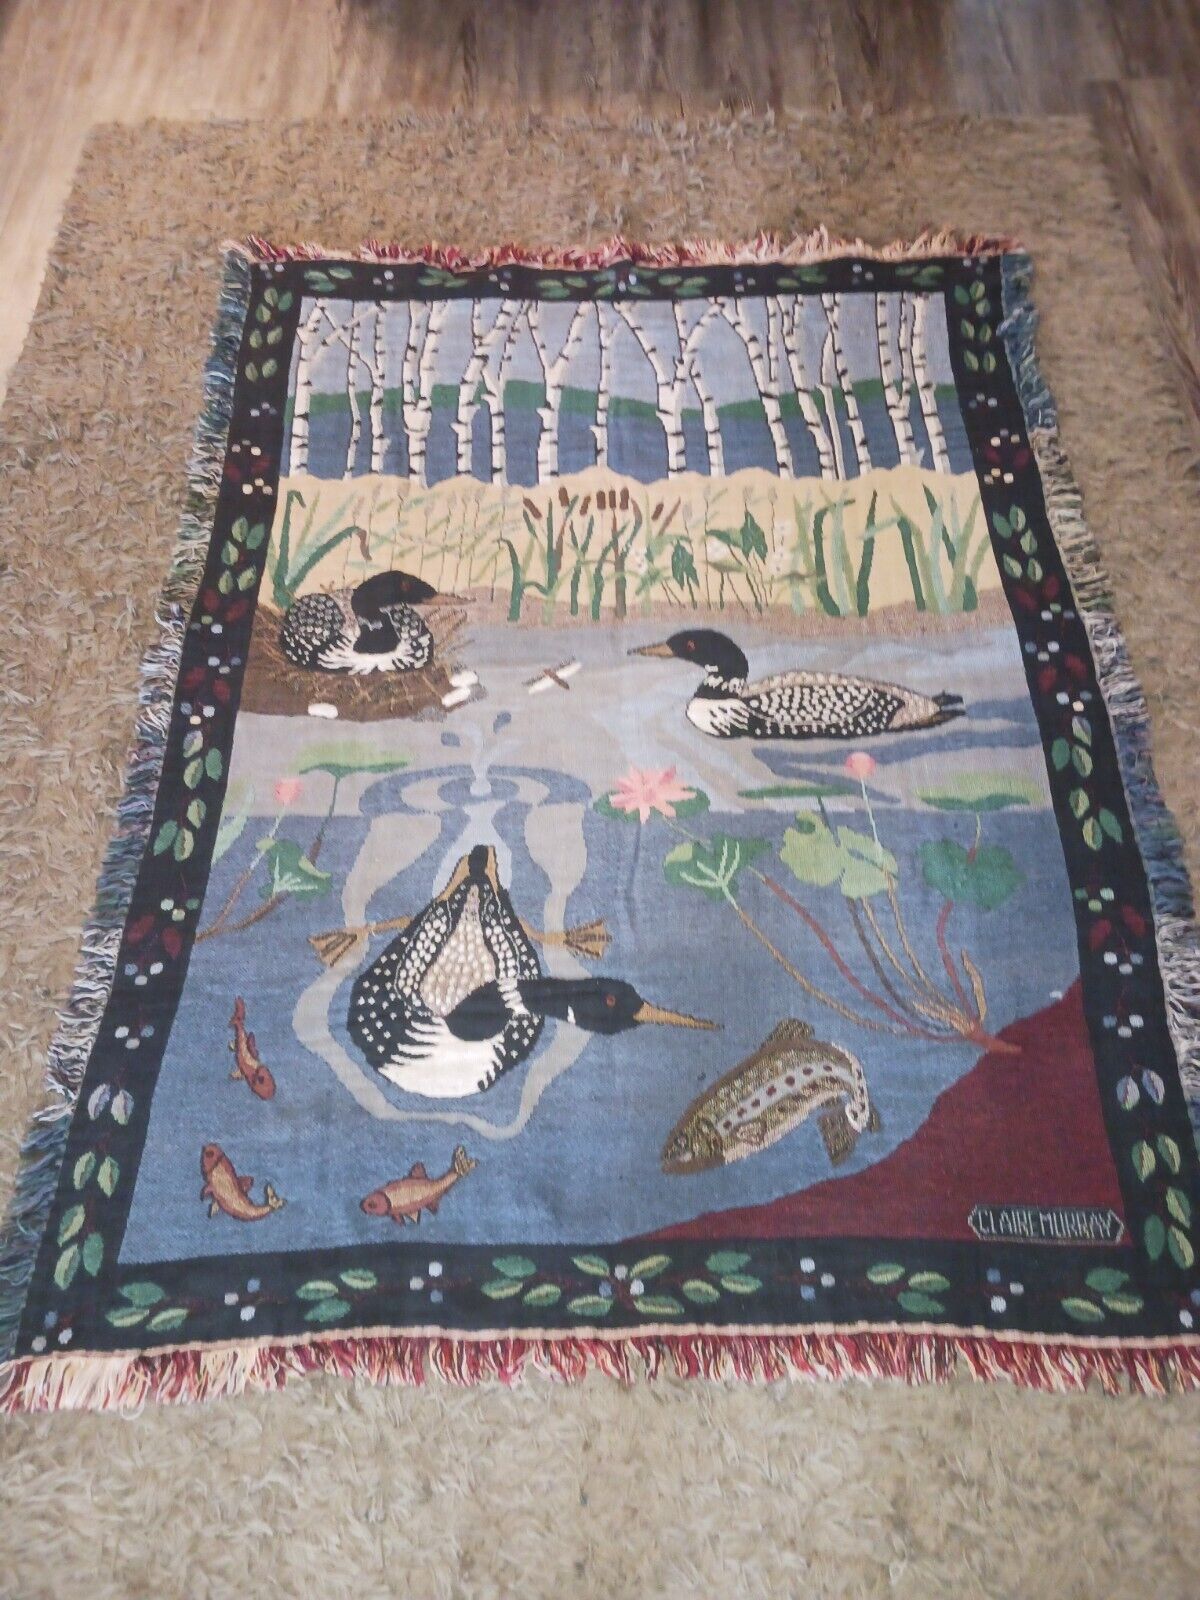  Vintage Claire Murray Pond Fish Ducks Cabin Woven Tapestry Throw Blanket 